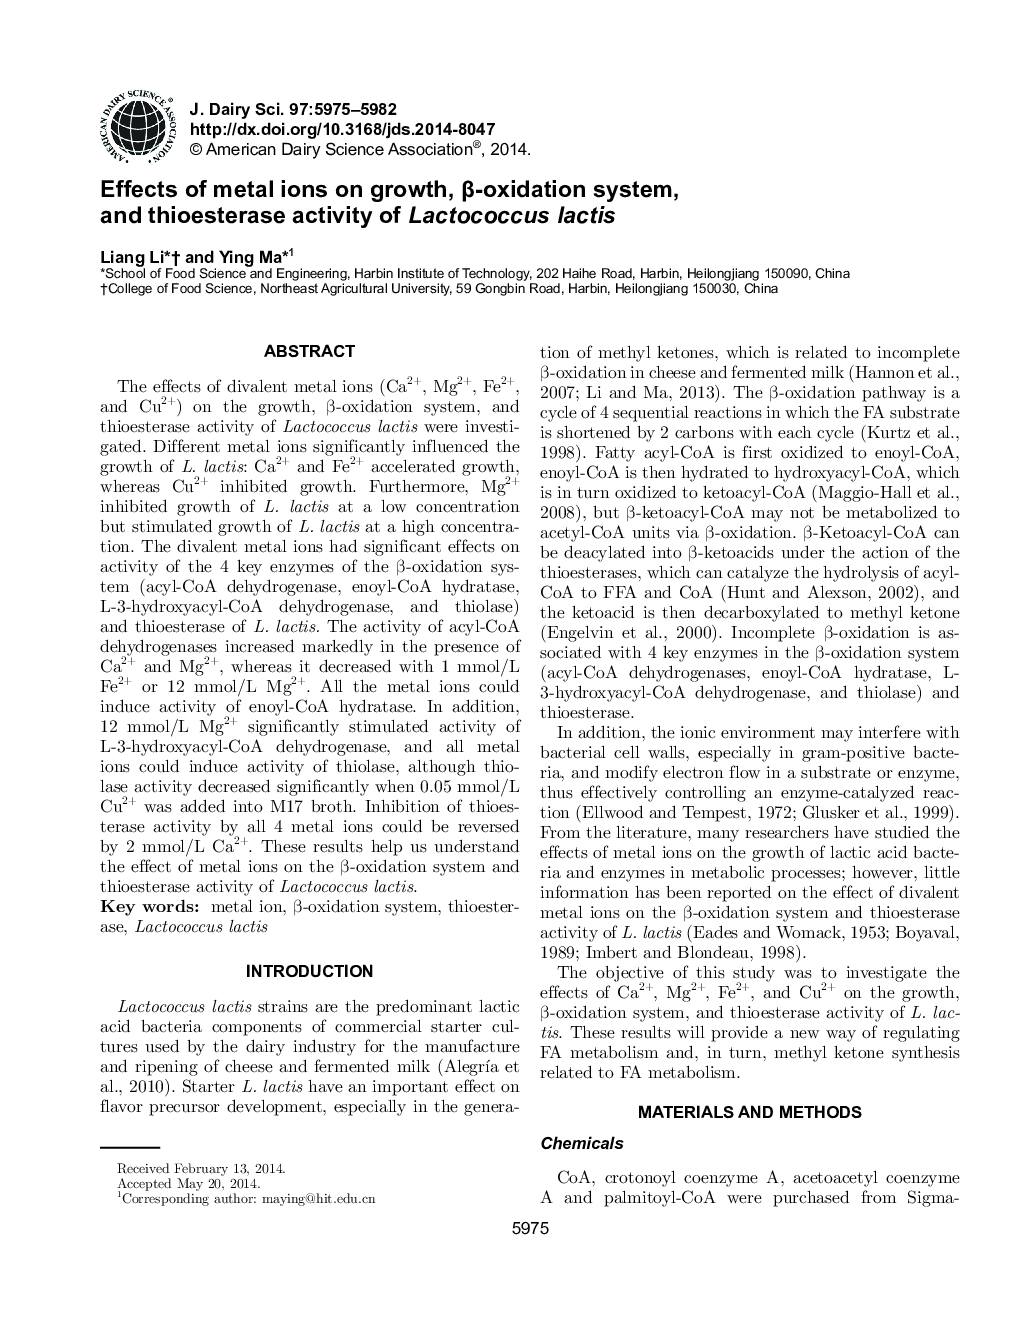 Effects of metal ions on growth, Î²-oxidation system, and thioesterase activity of Lactococcus lactis